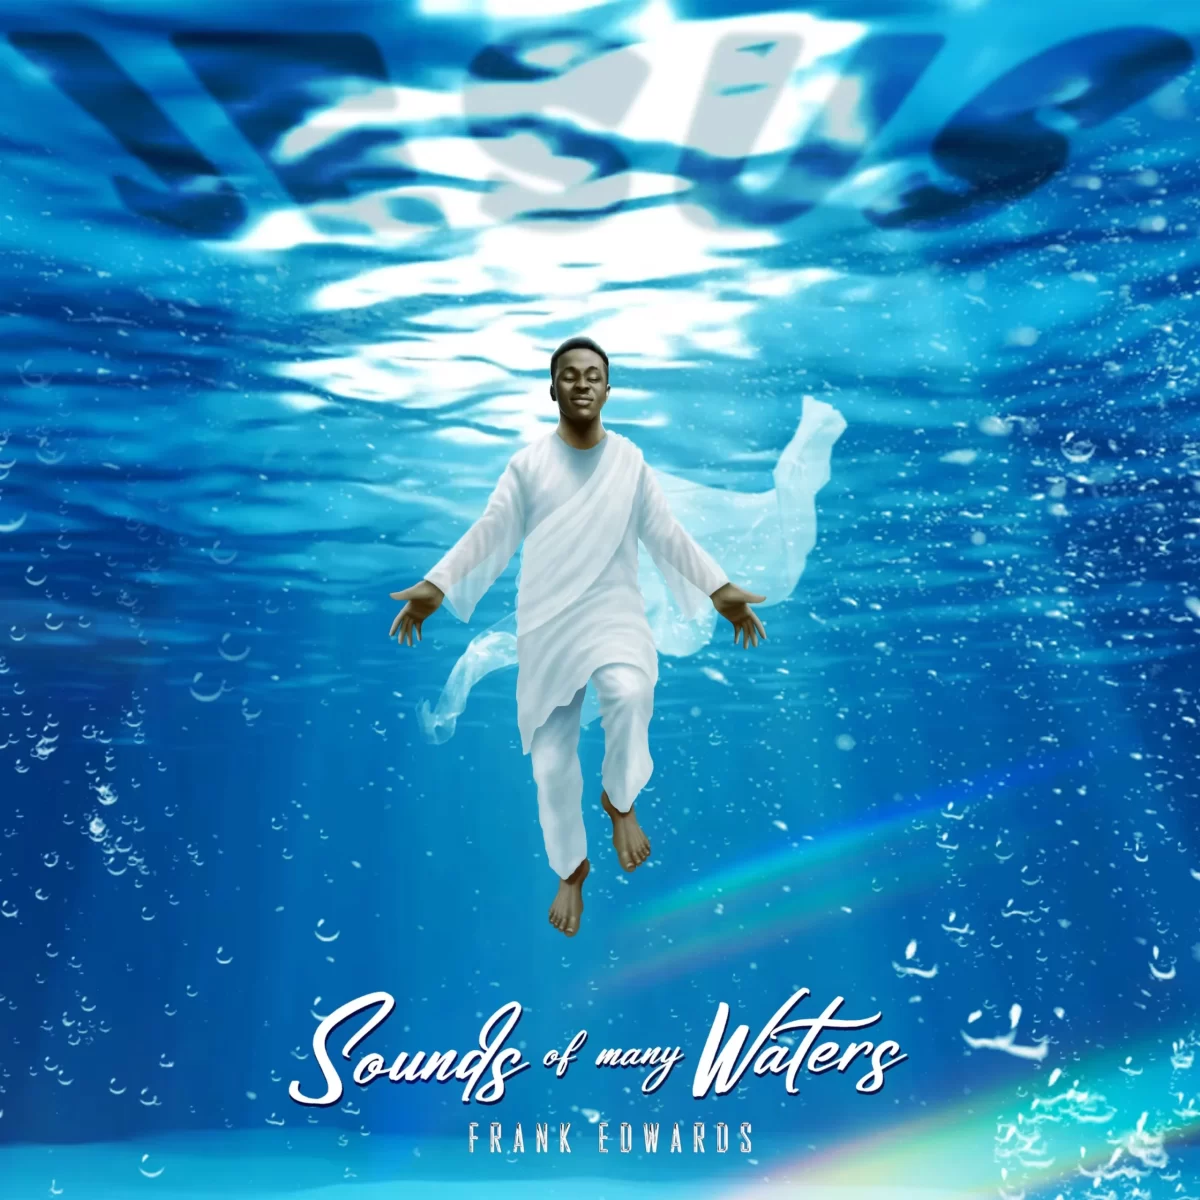 TMAQTALK MUSIC : Frank Edwards – Sounds Of Many Waters